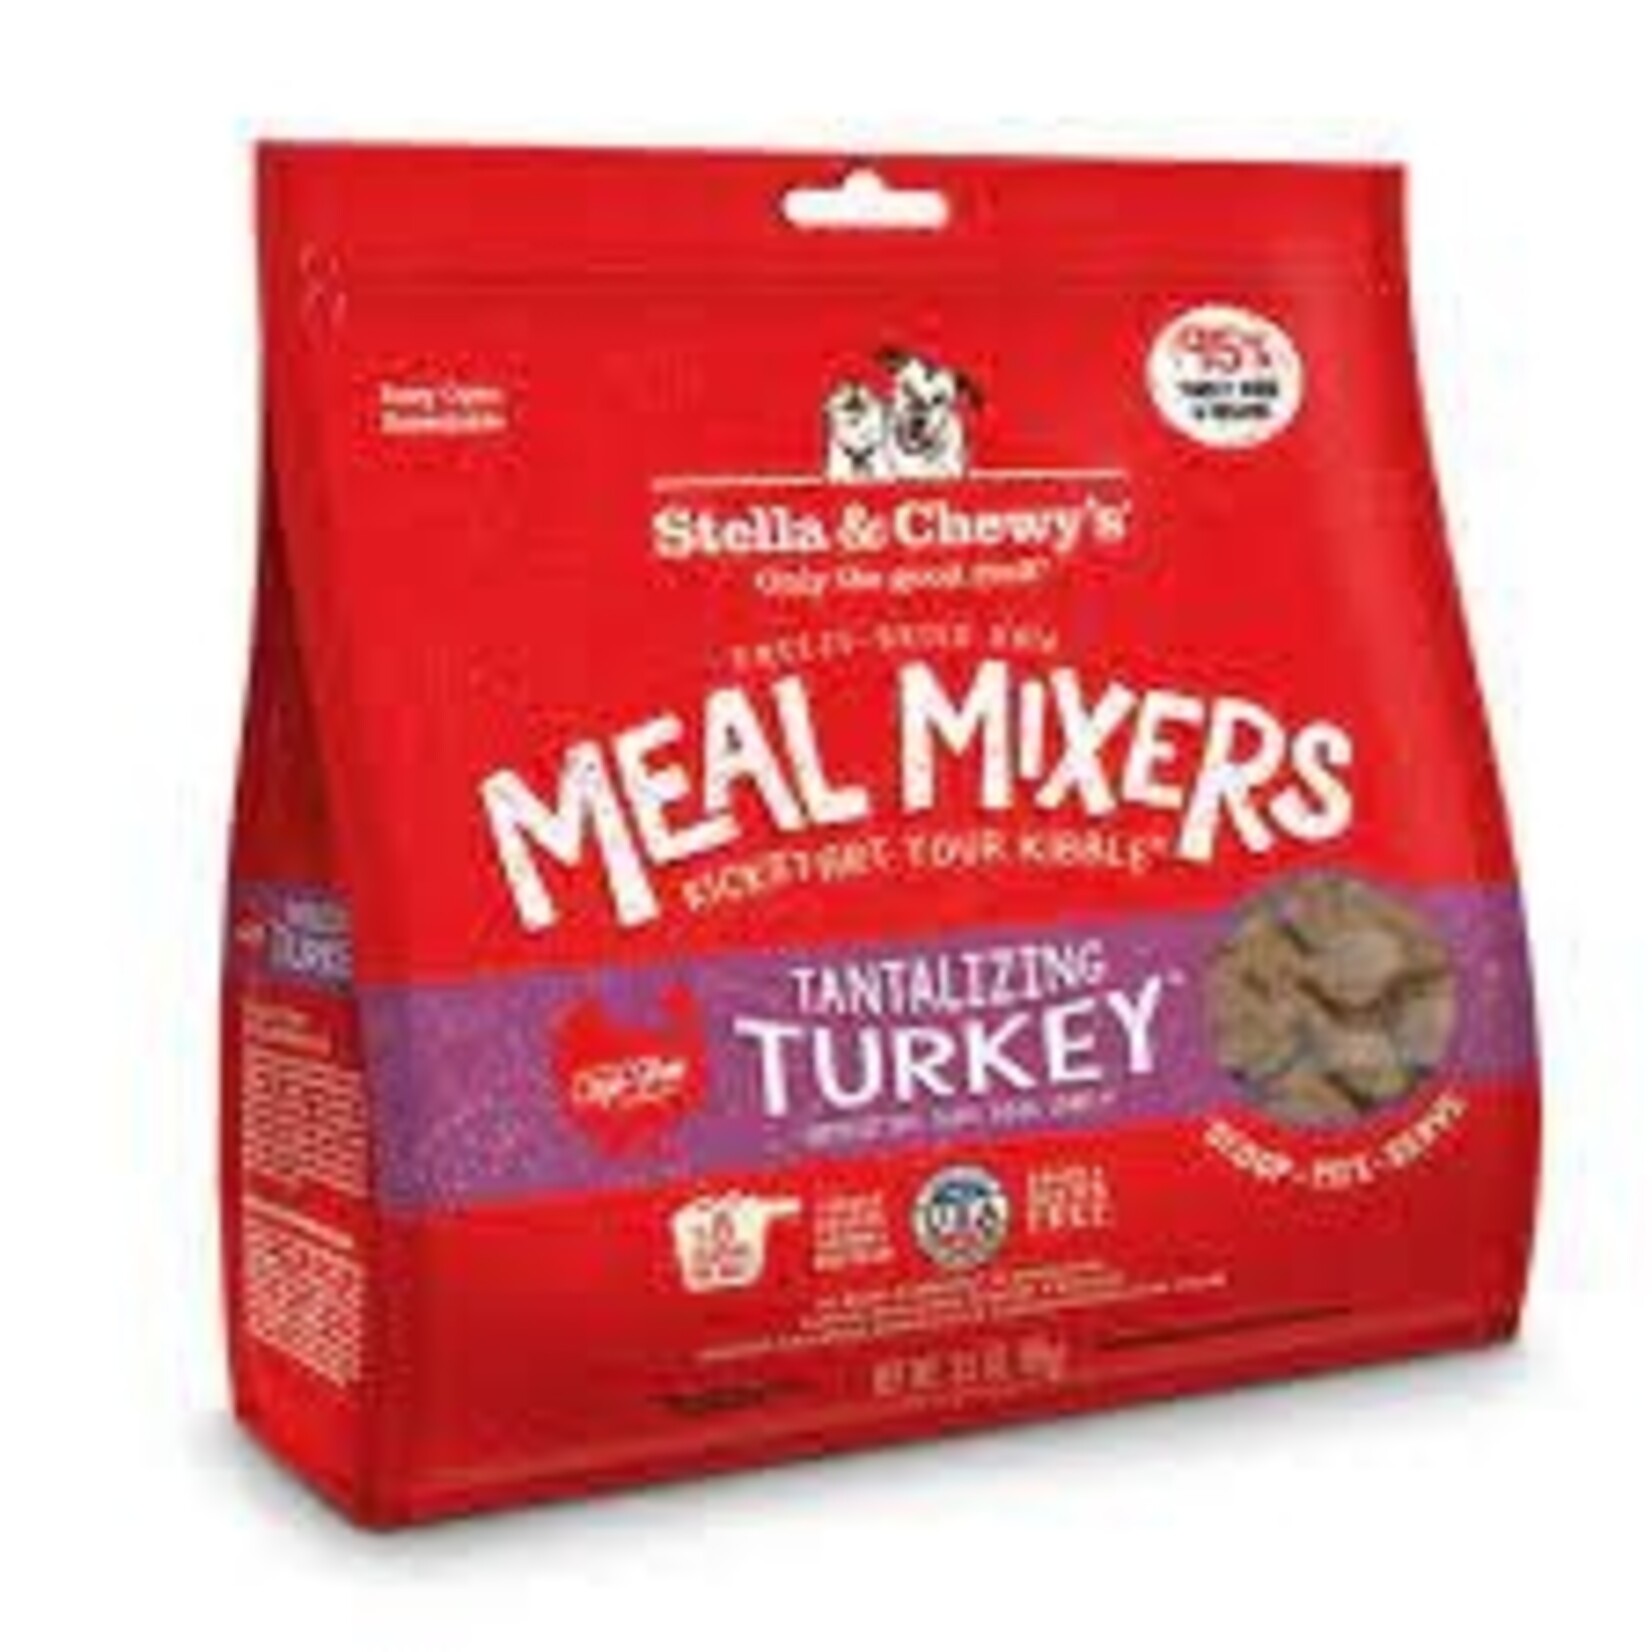 Stella & chewy's SC FD Meal Mixers Tantalizing Turkey 18OZ